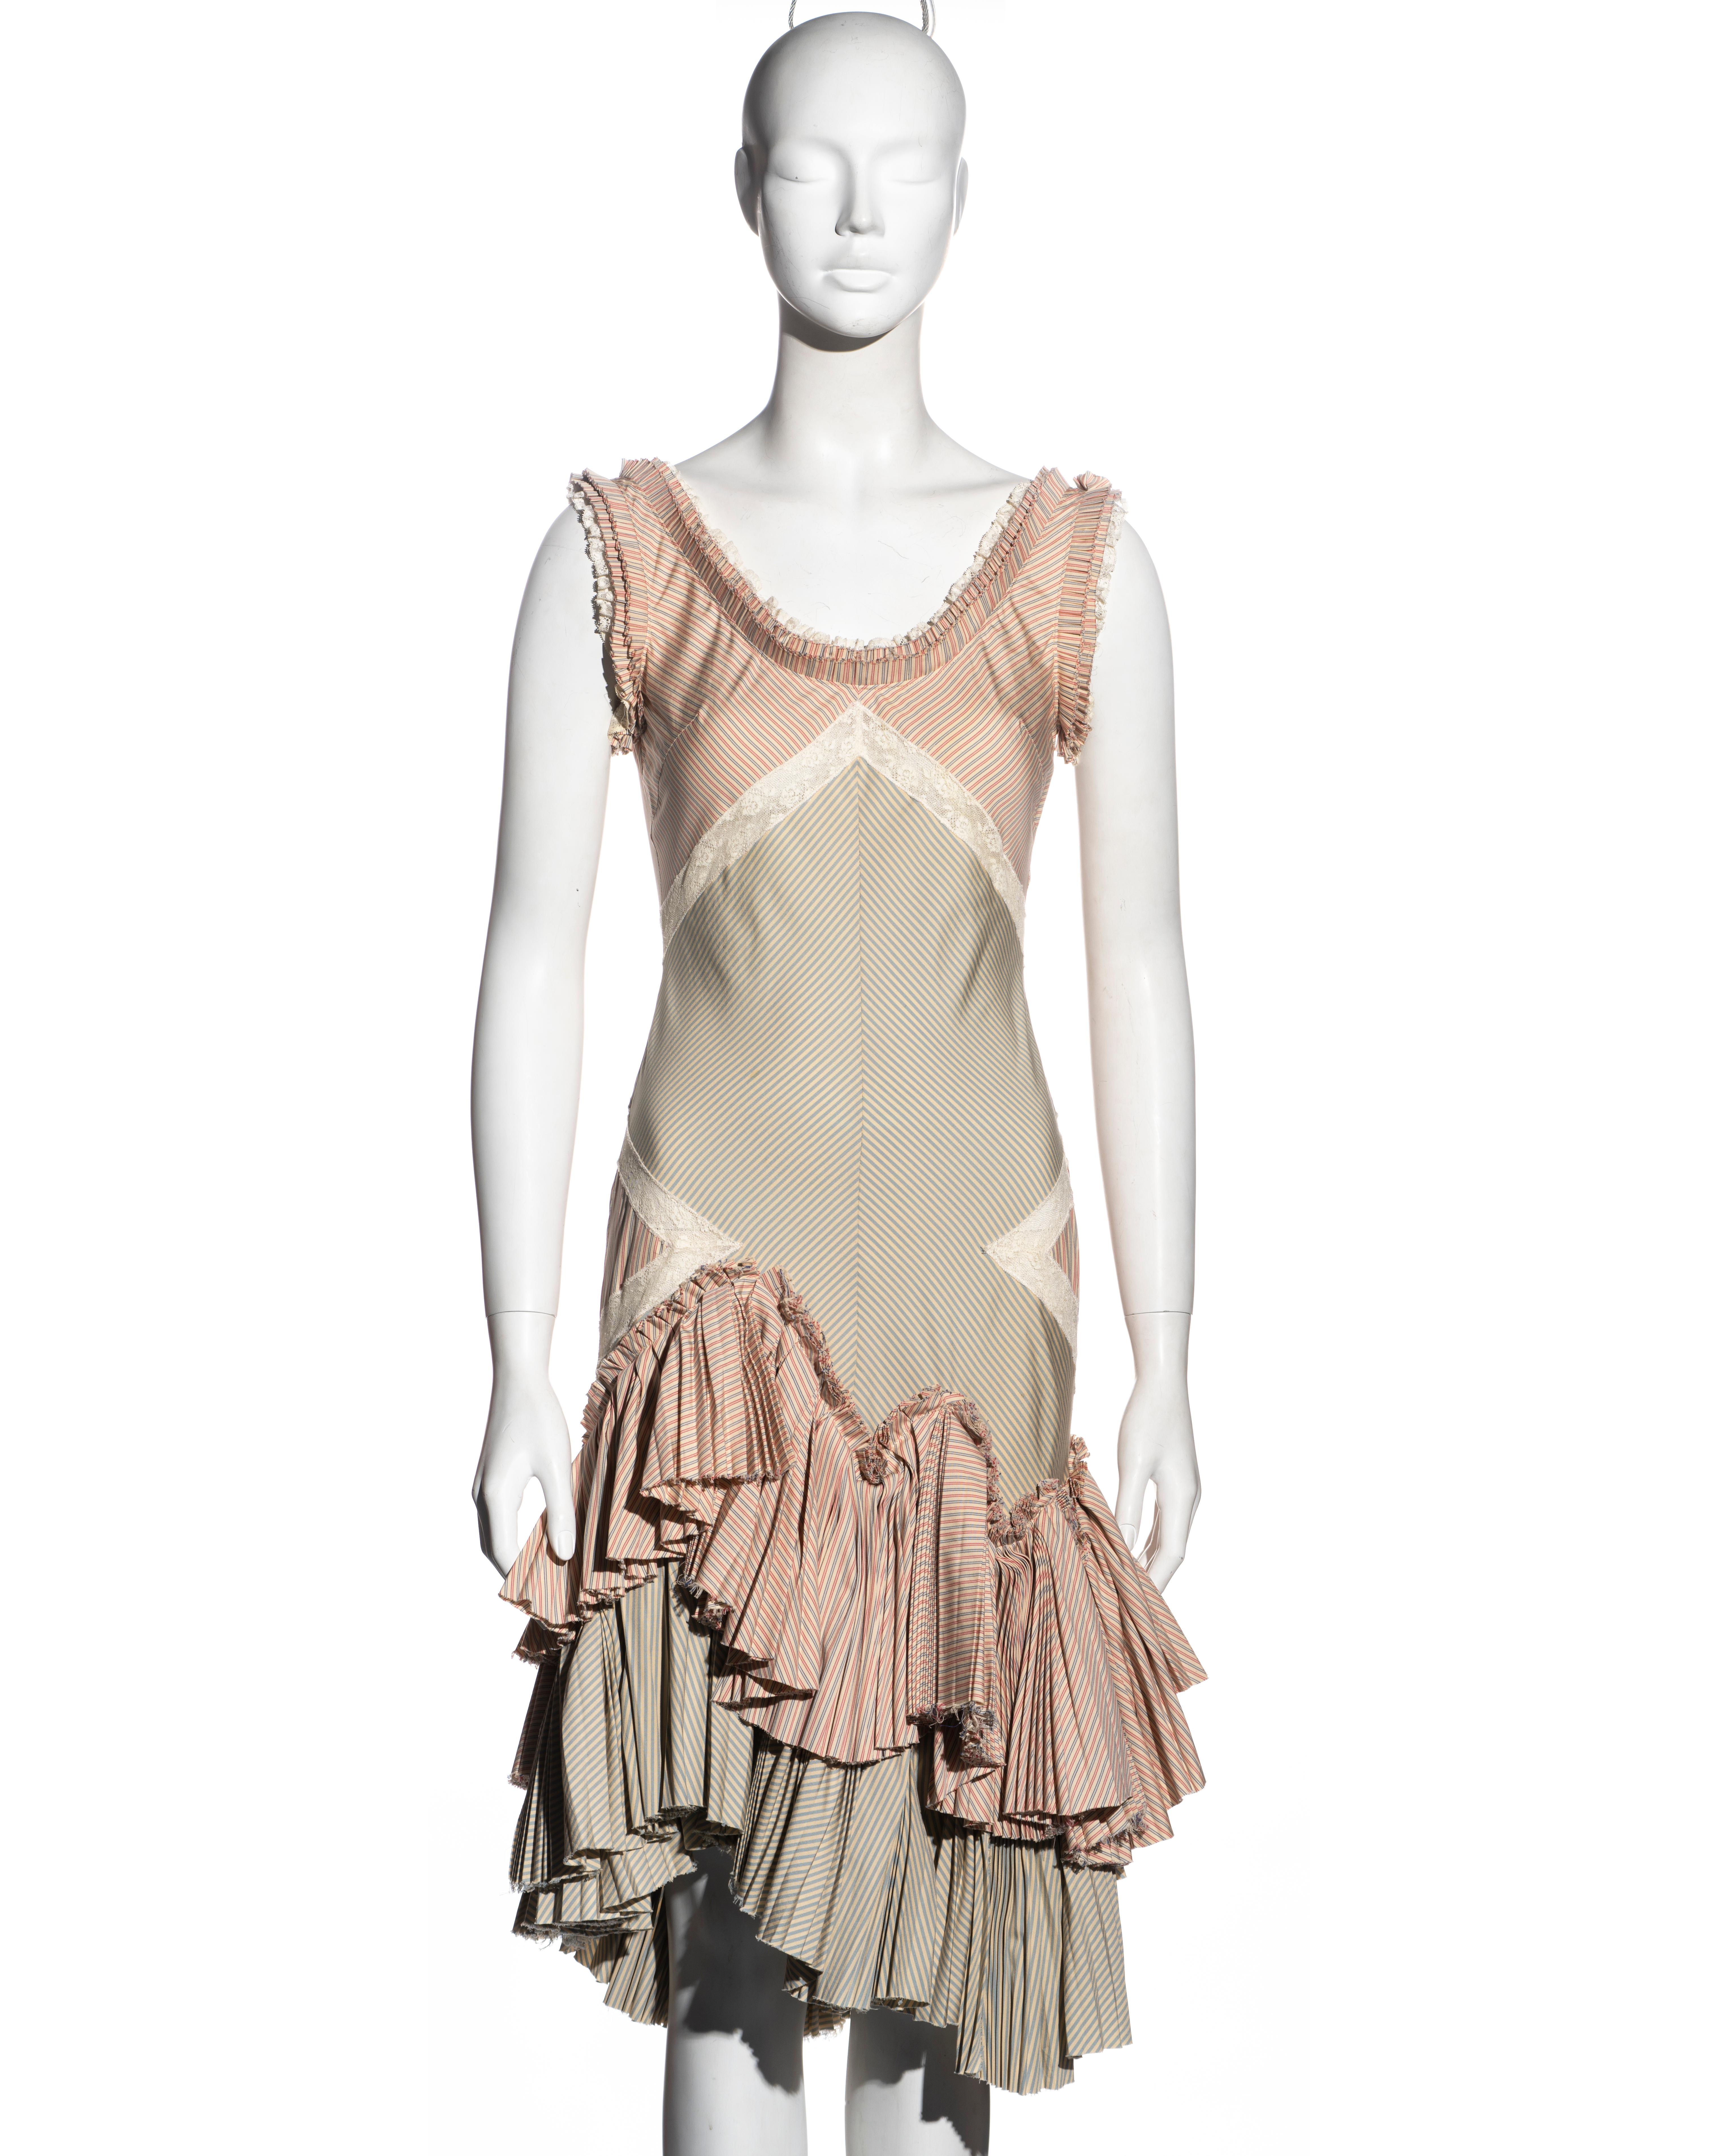 ▪ Alexander McQueen dress
▪ Constructed from a fine cotton-silk fabric in two colour-ways of red, cream and blue stripes
▪ Ivory lace inserts and trim 
▪ Low-waisted skirt made up of two tiers of pleats with asymmetric hemline
▪ IT 40 - FR 36 - UK